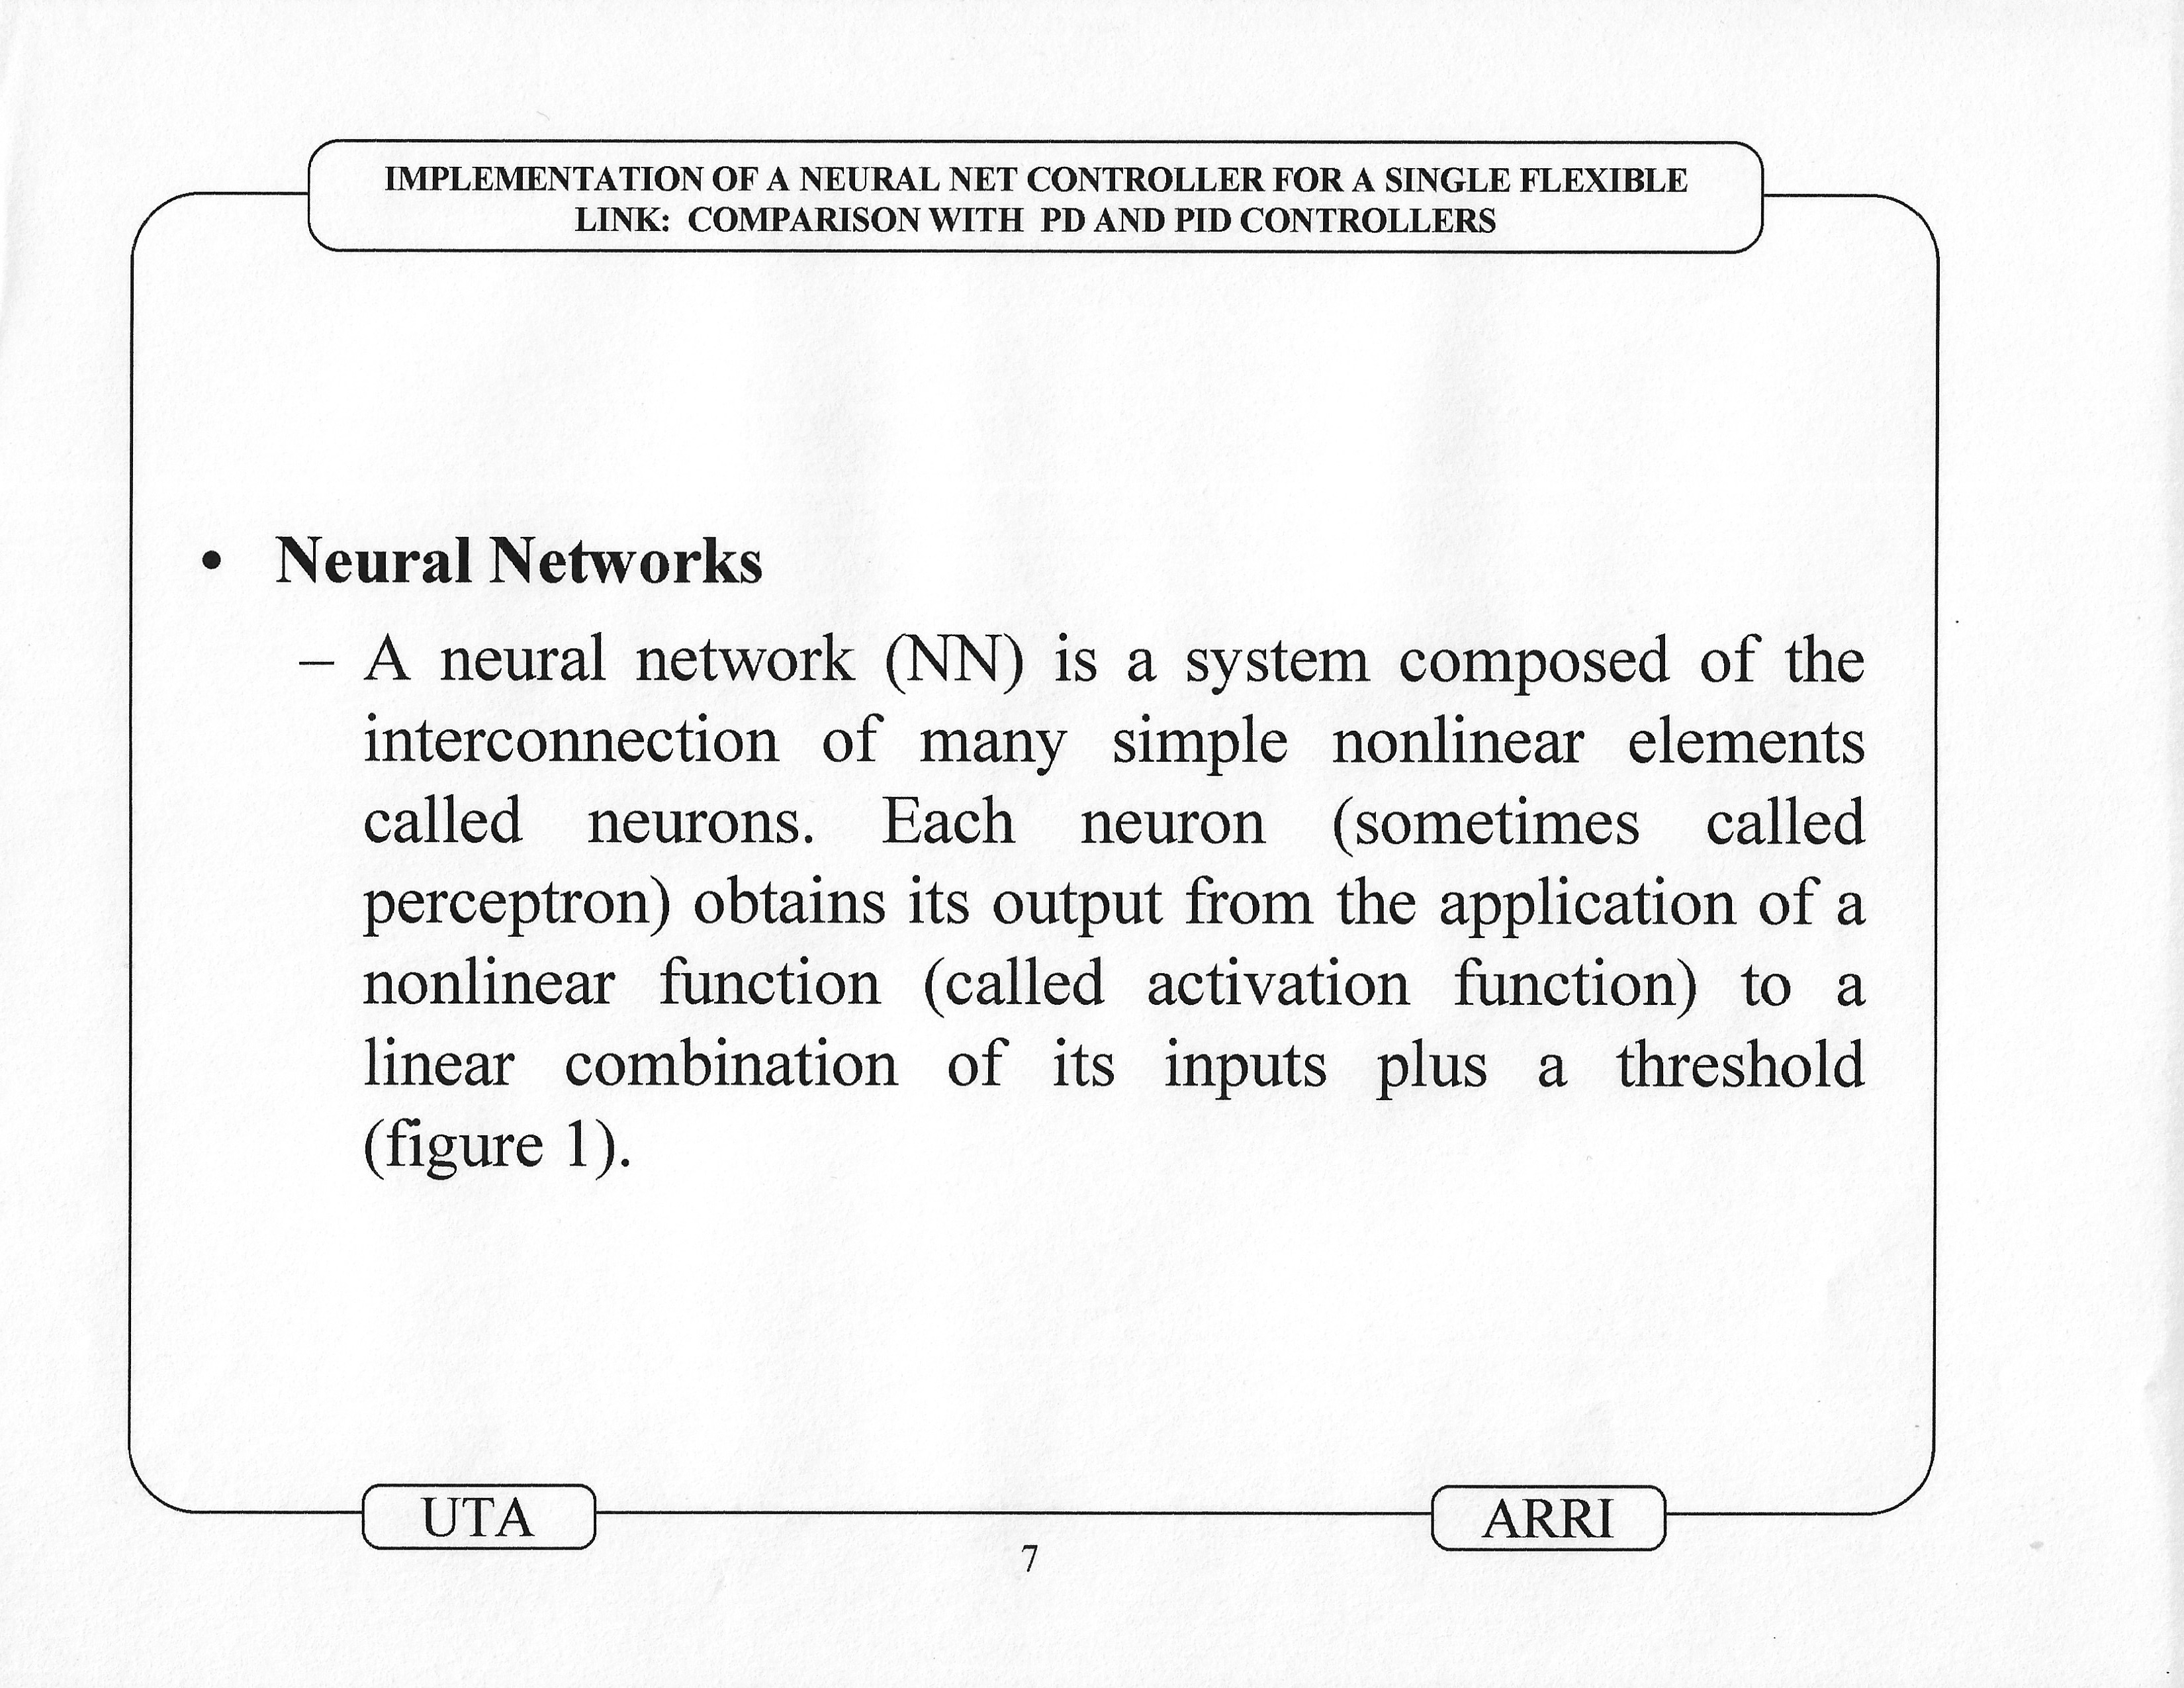 960724_Gutierrez_1996_Implementation_of_a_Neural_Net_Tracking_Controller_for_a_Single_Flexible_Link_Comparison_with_PD_and_PID_controllers_presentation_06